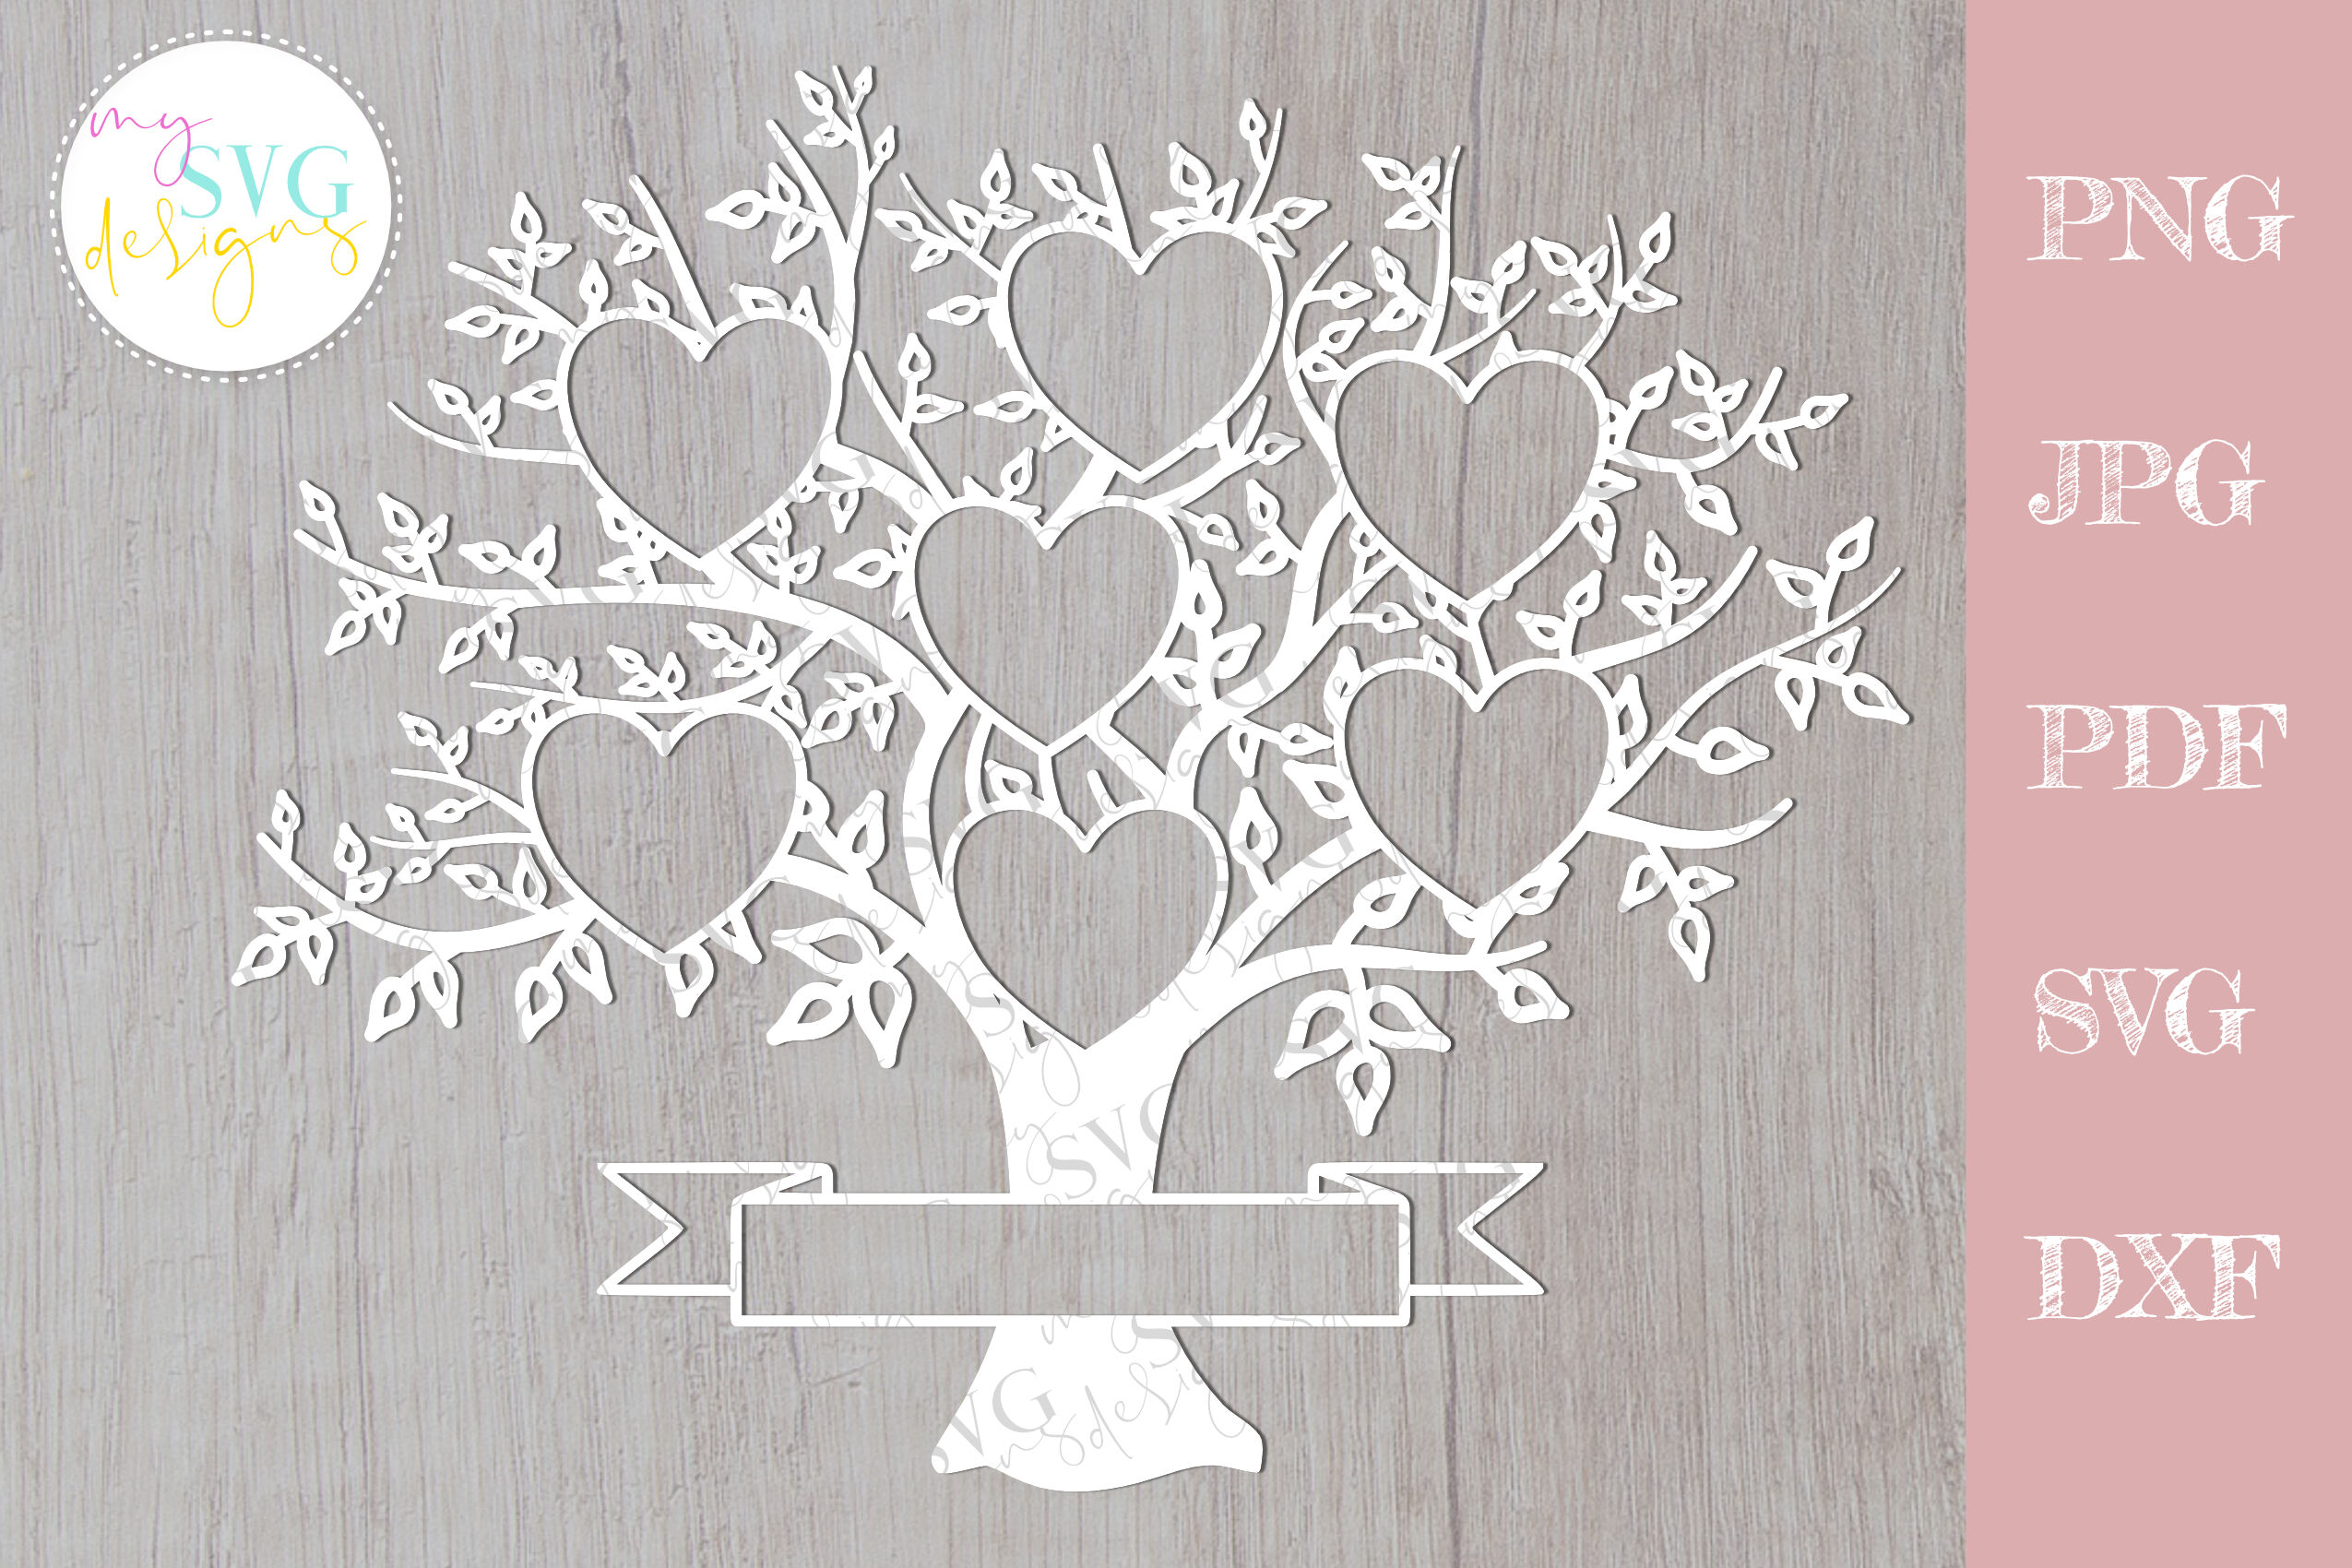 Family tree svg 7 members, svg family tree, family reunion svg By